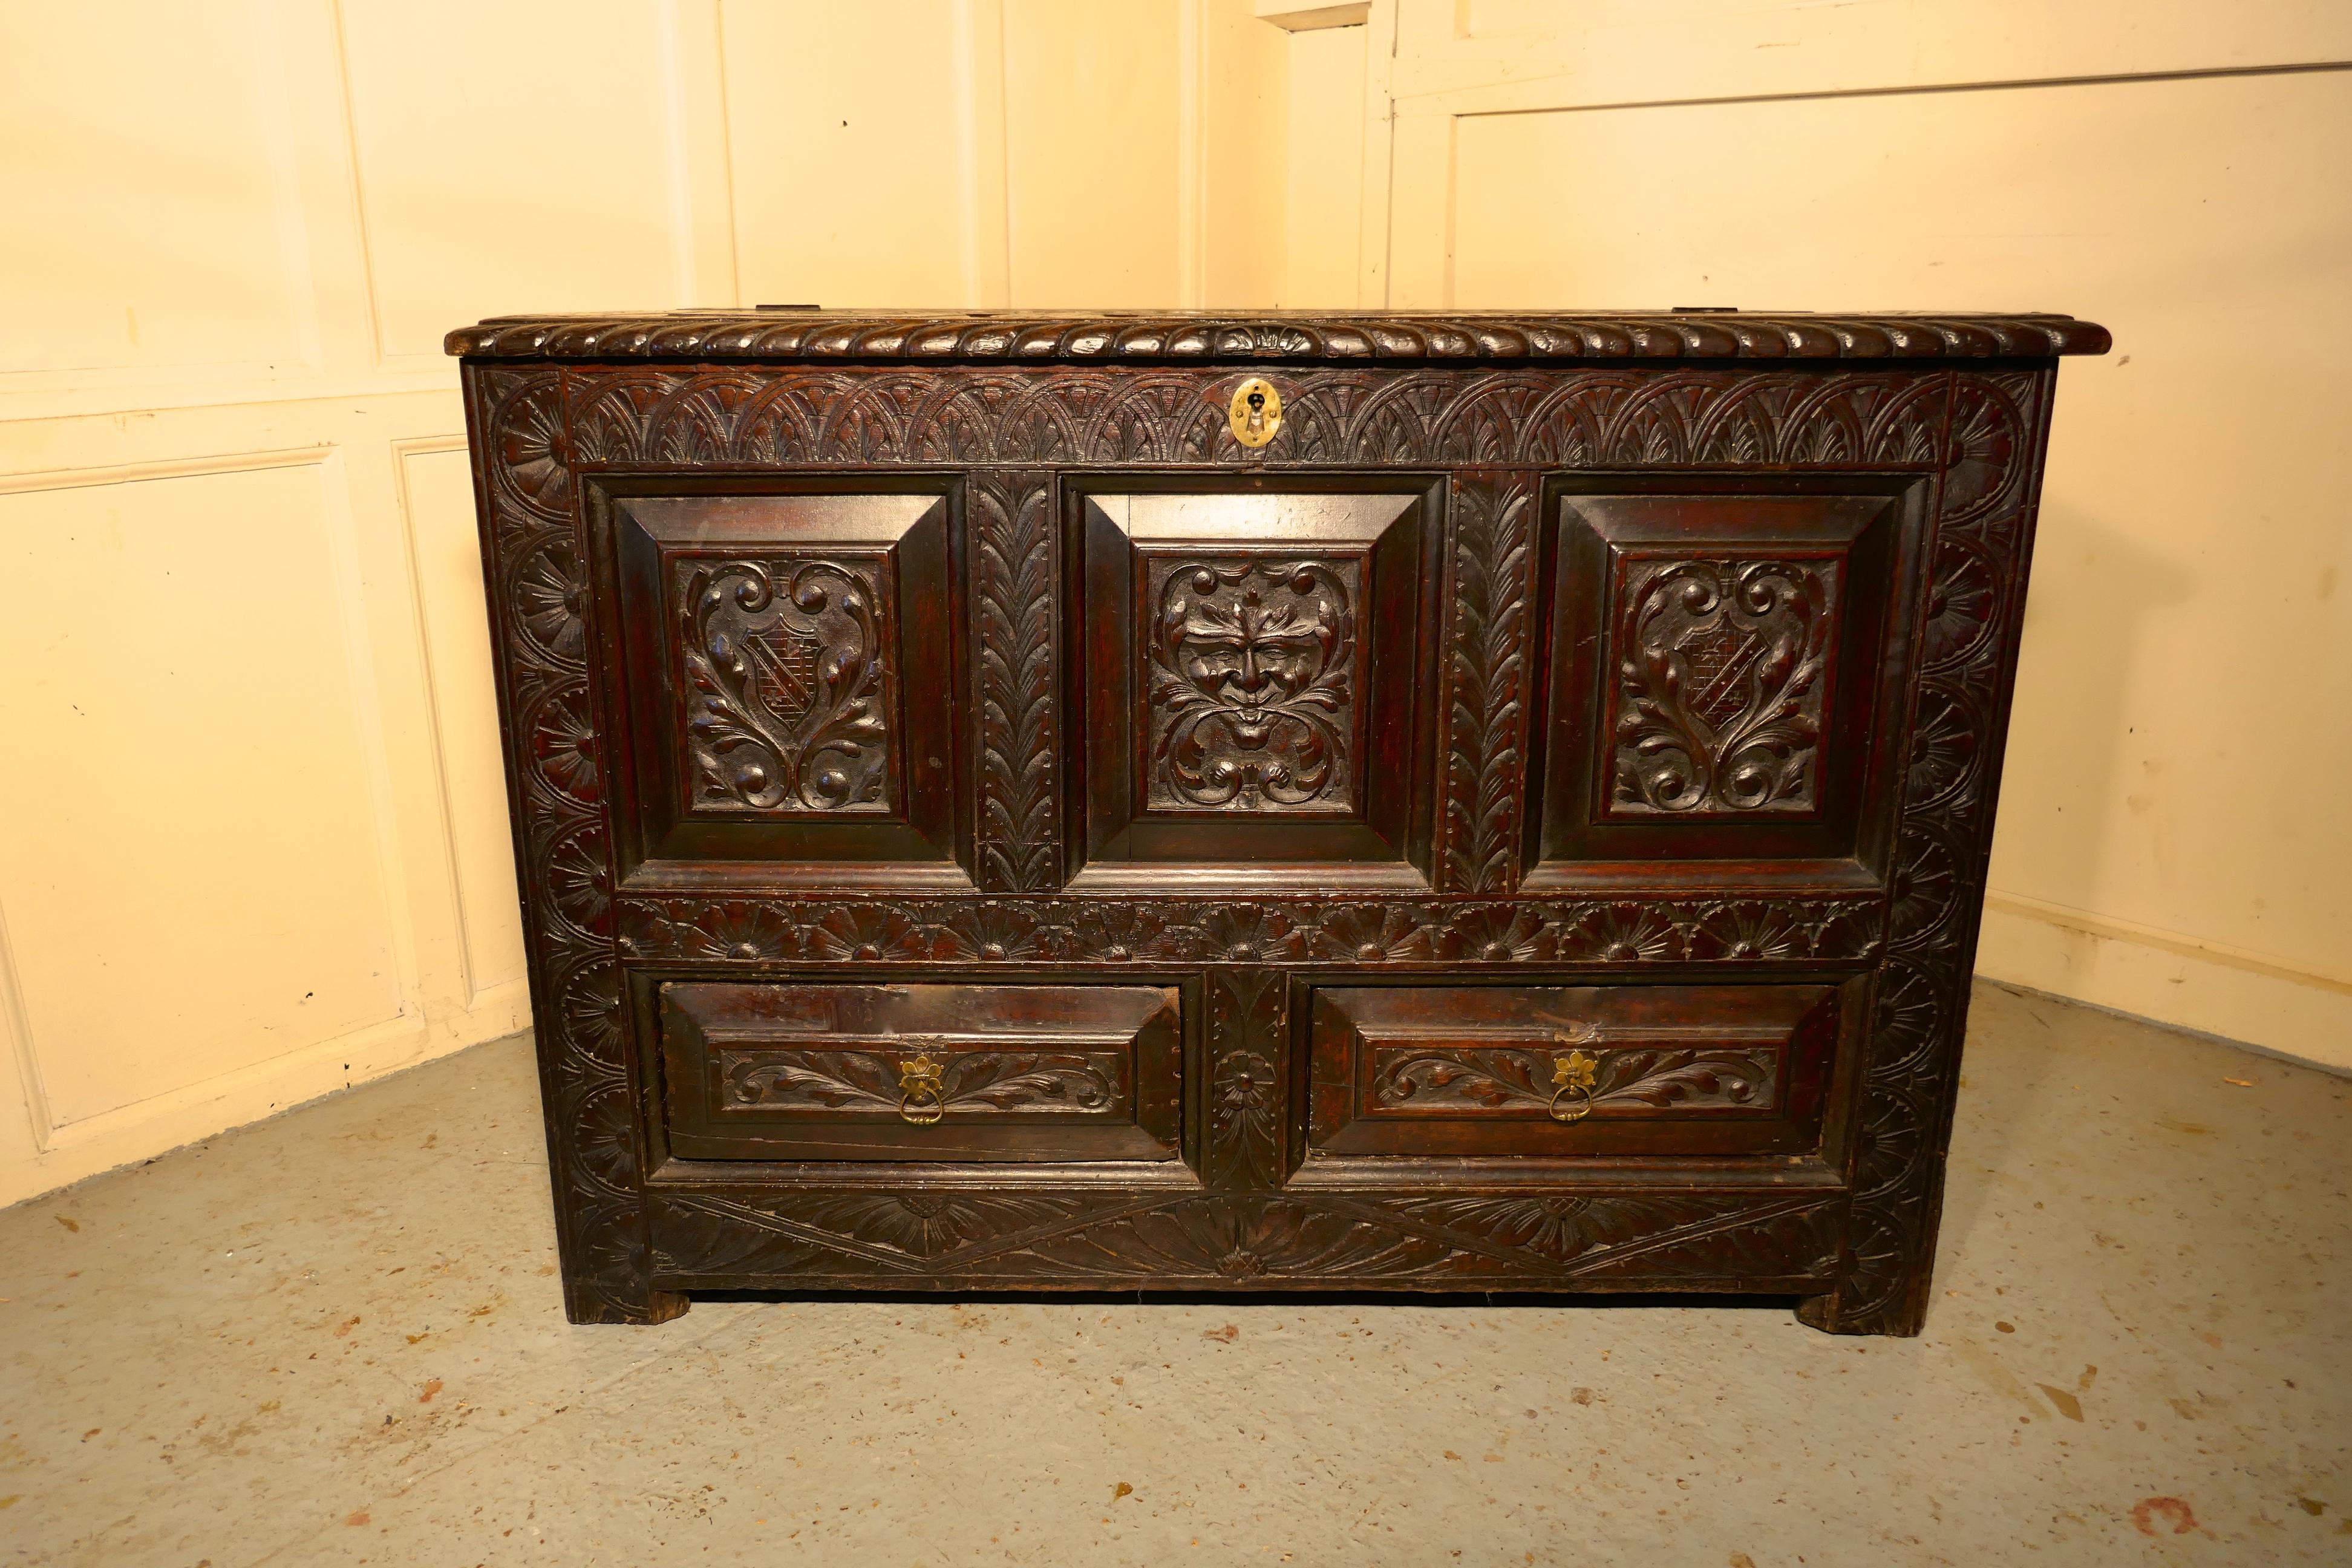 Large Carved Oak Mule Chest, Green Man Marriage Chest

This is a profusely carved Marriage chest, the coffer has many detailed carved panels. On the front we have 2 family crests on either side of the Green man’s face, and on the top we have another